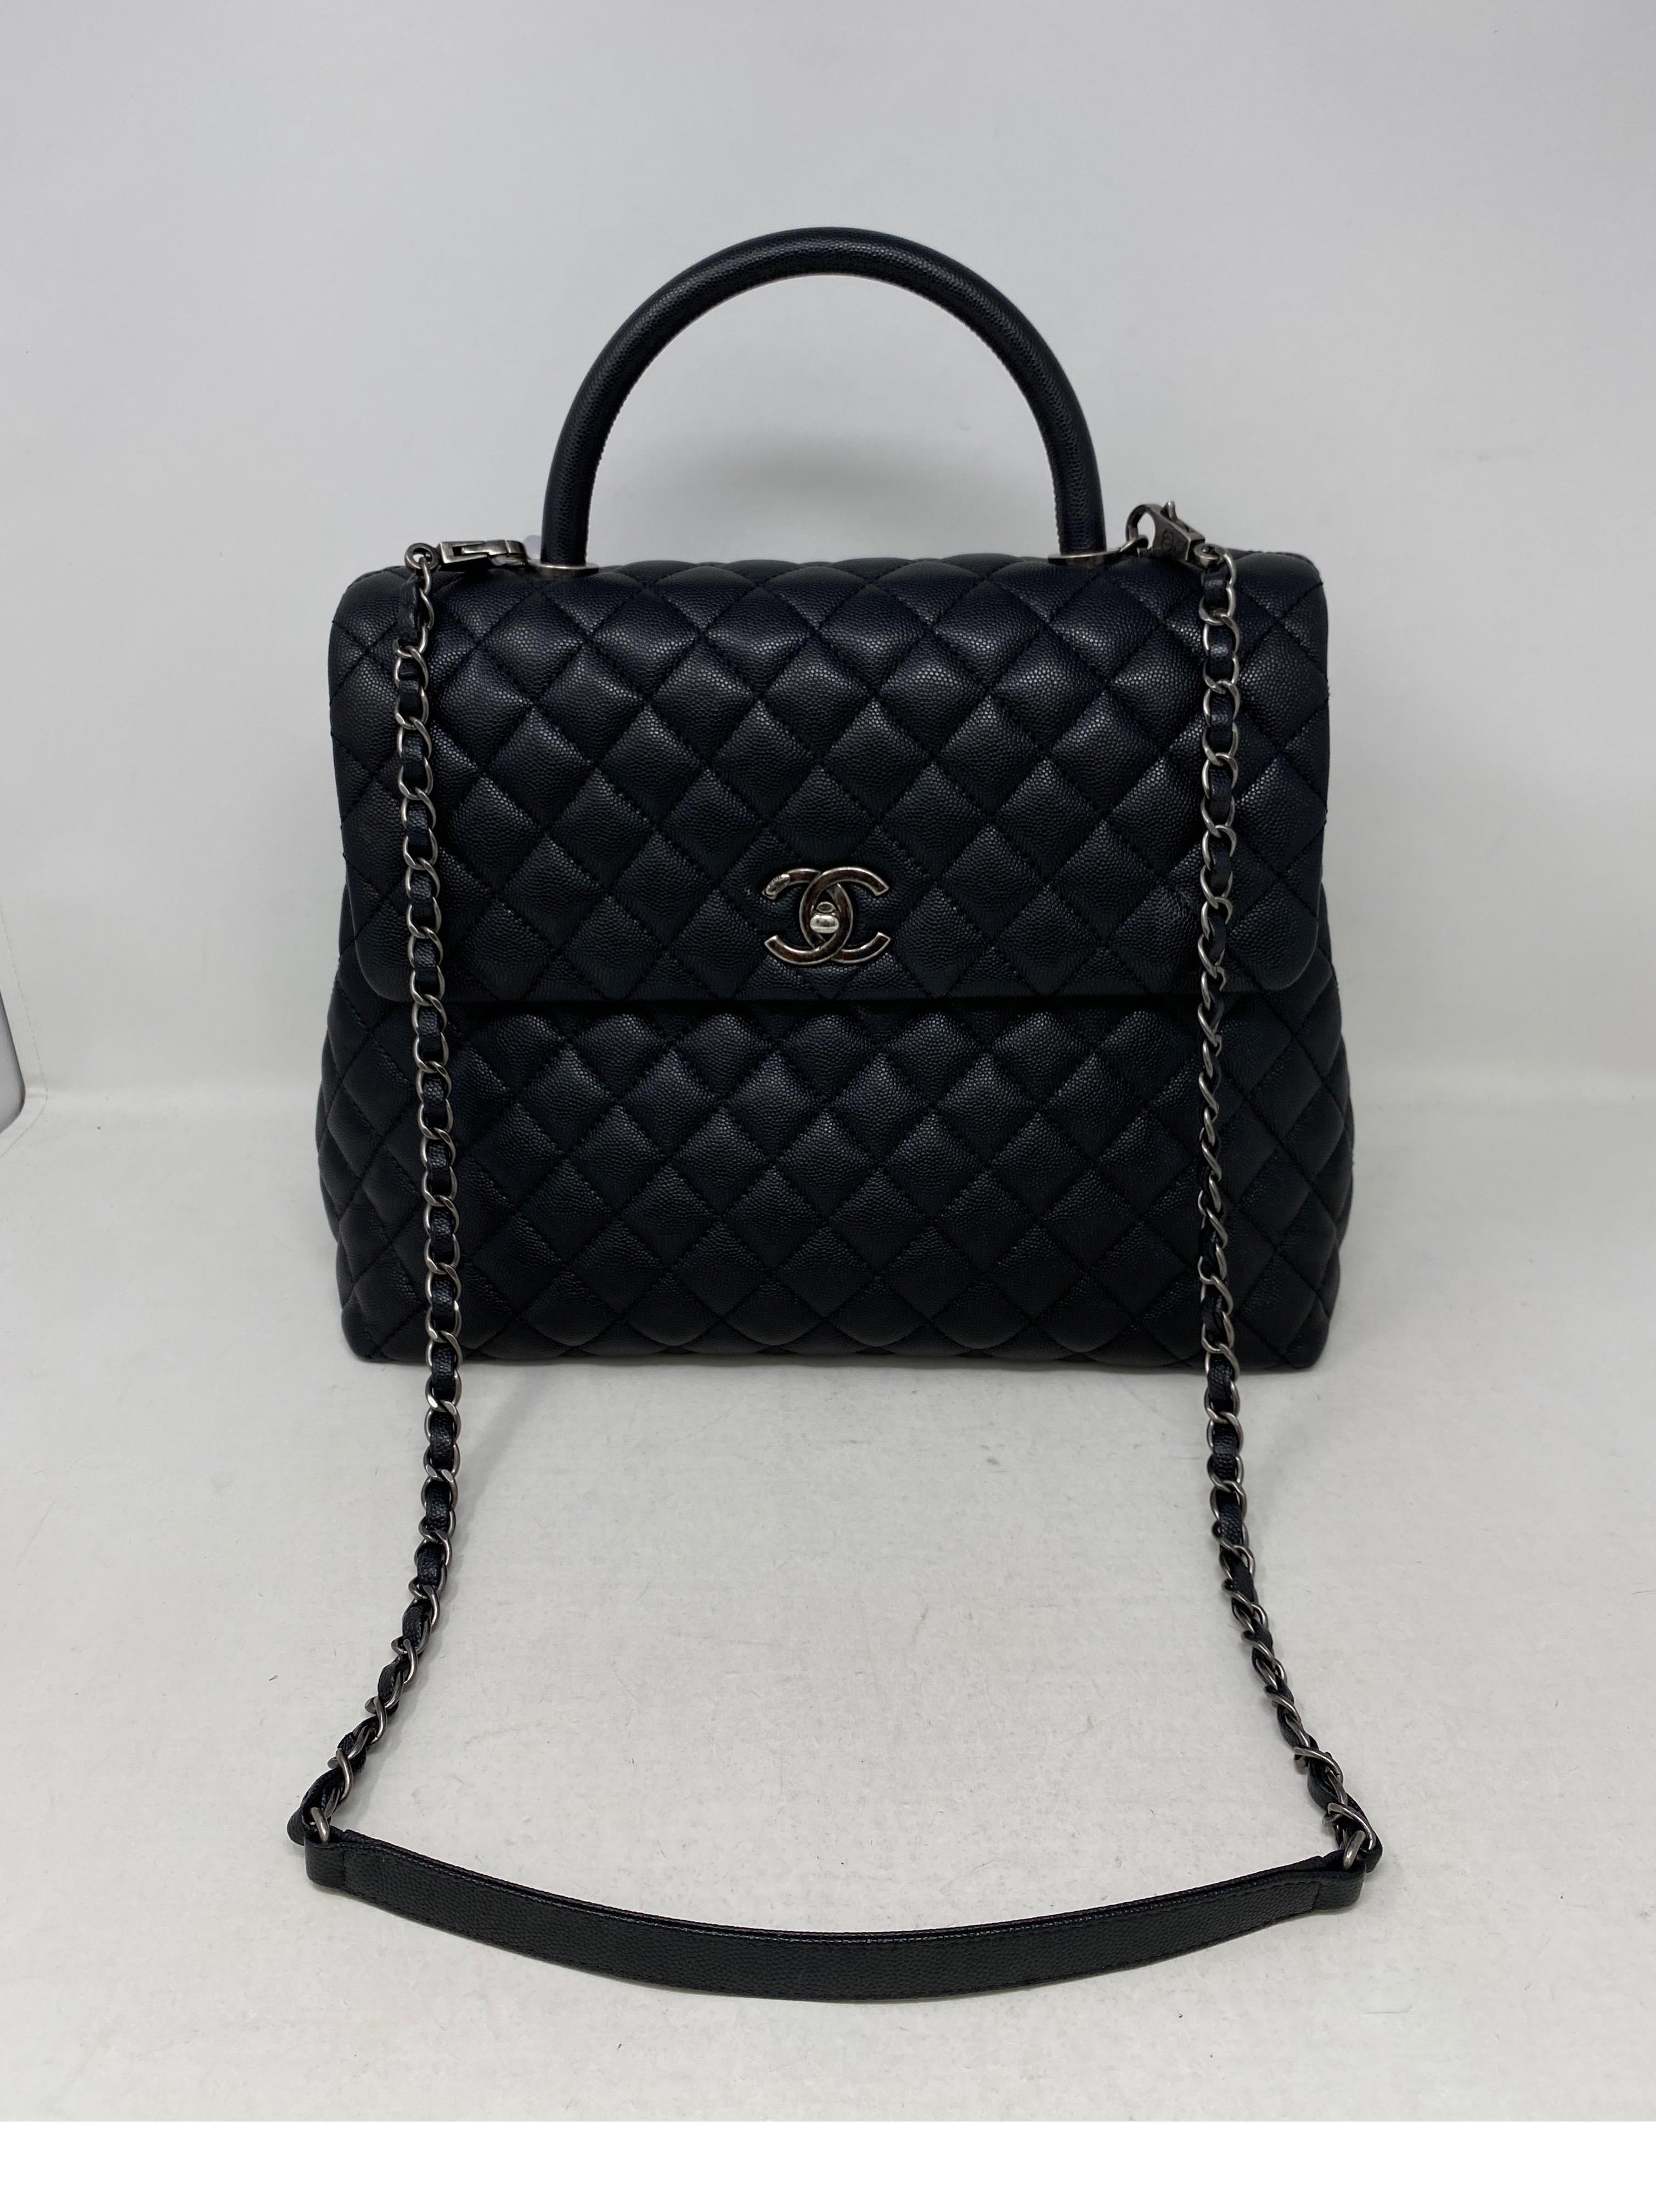 Chanel Coco Handle Large Bag. Caviar leather. Silver hardware. Excellent like new condition. Large size bag. Guaranteed authentic. 